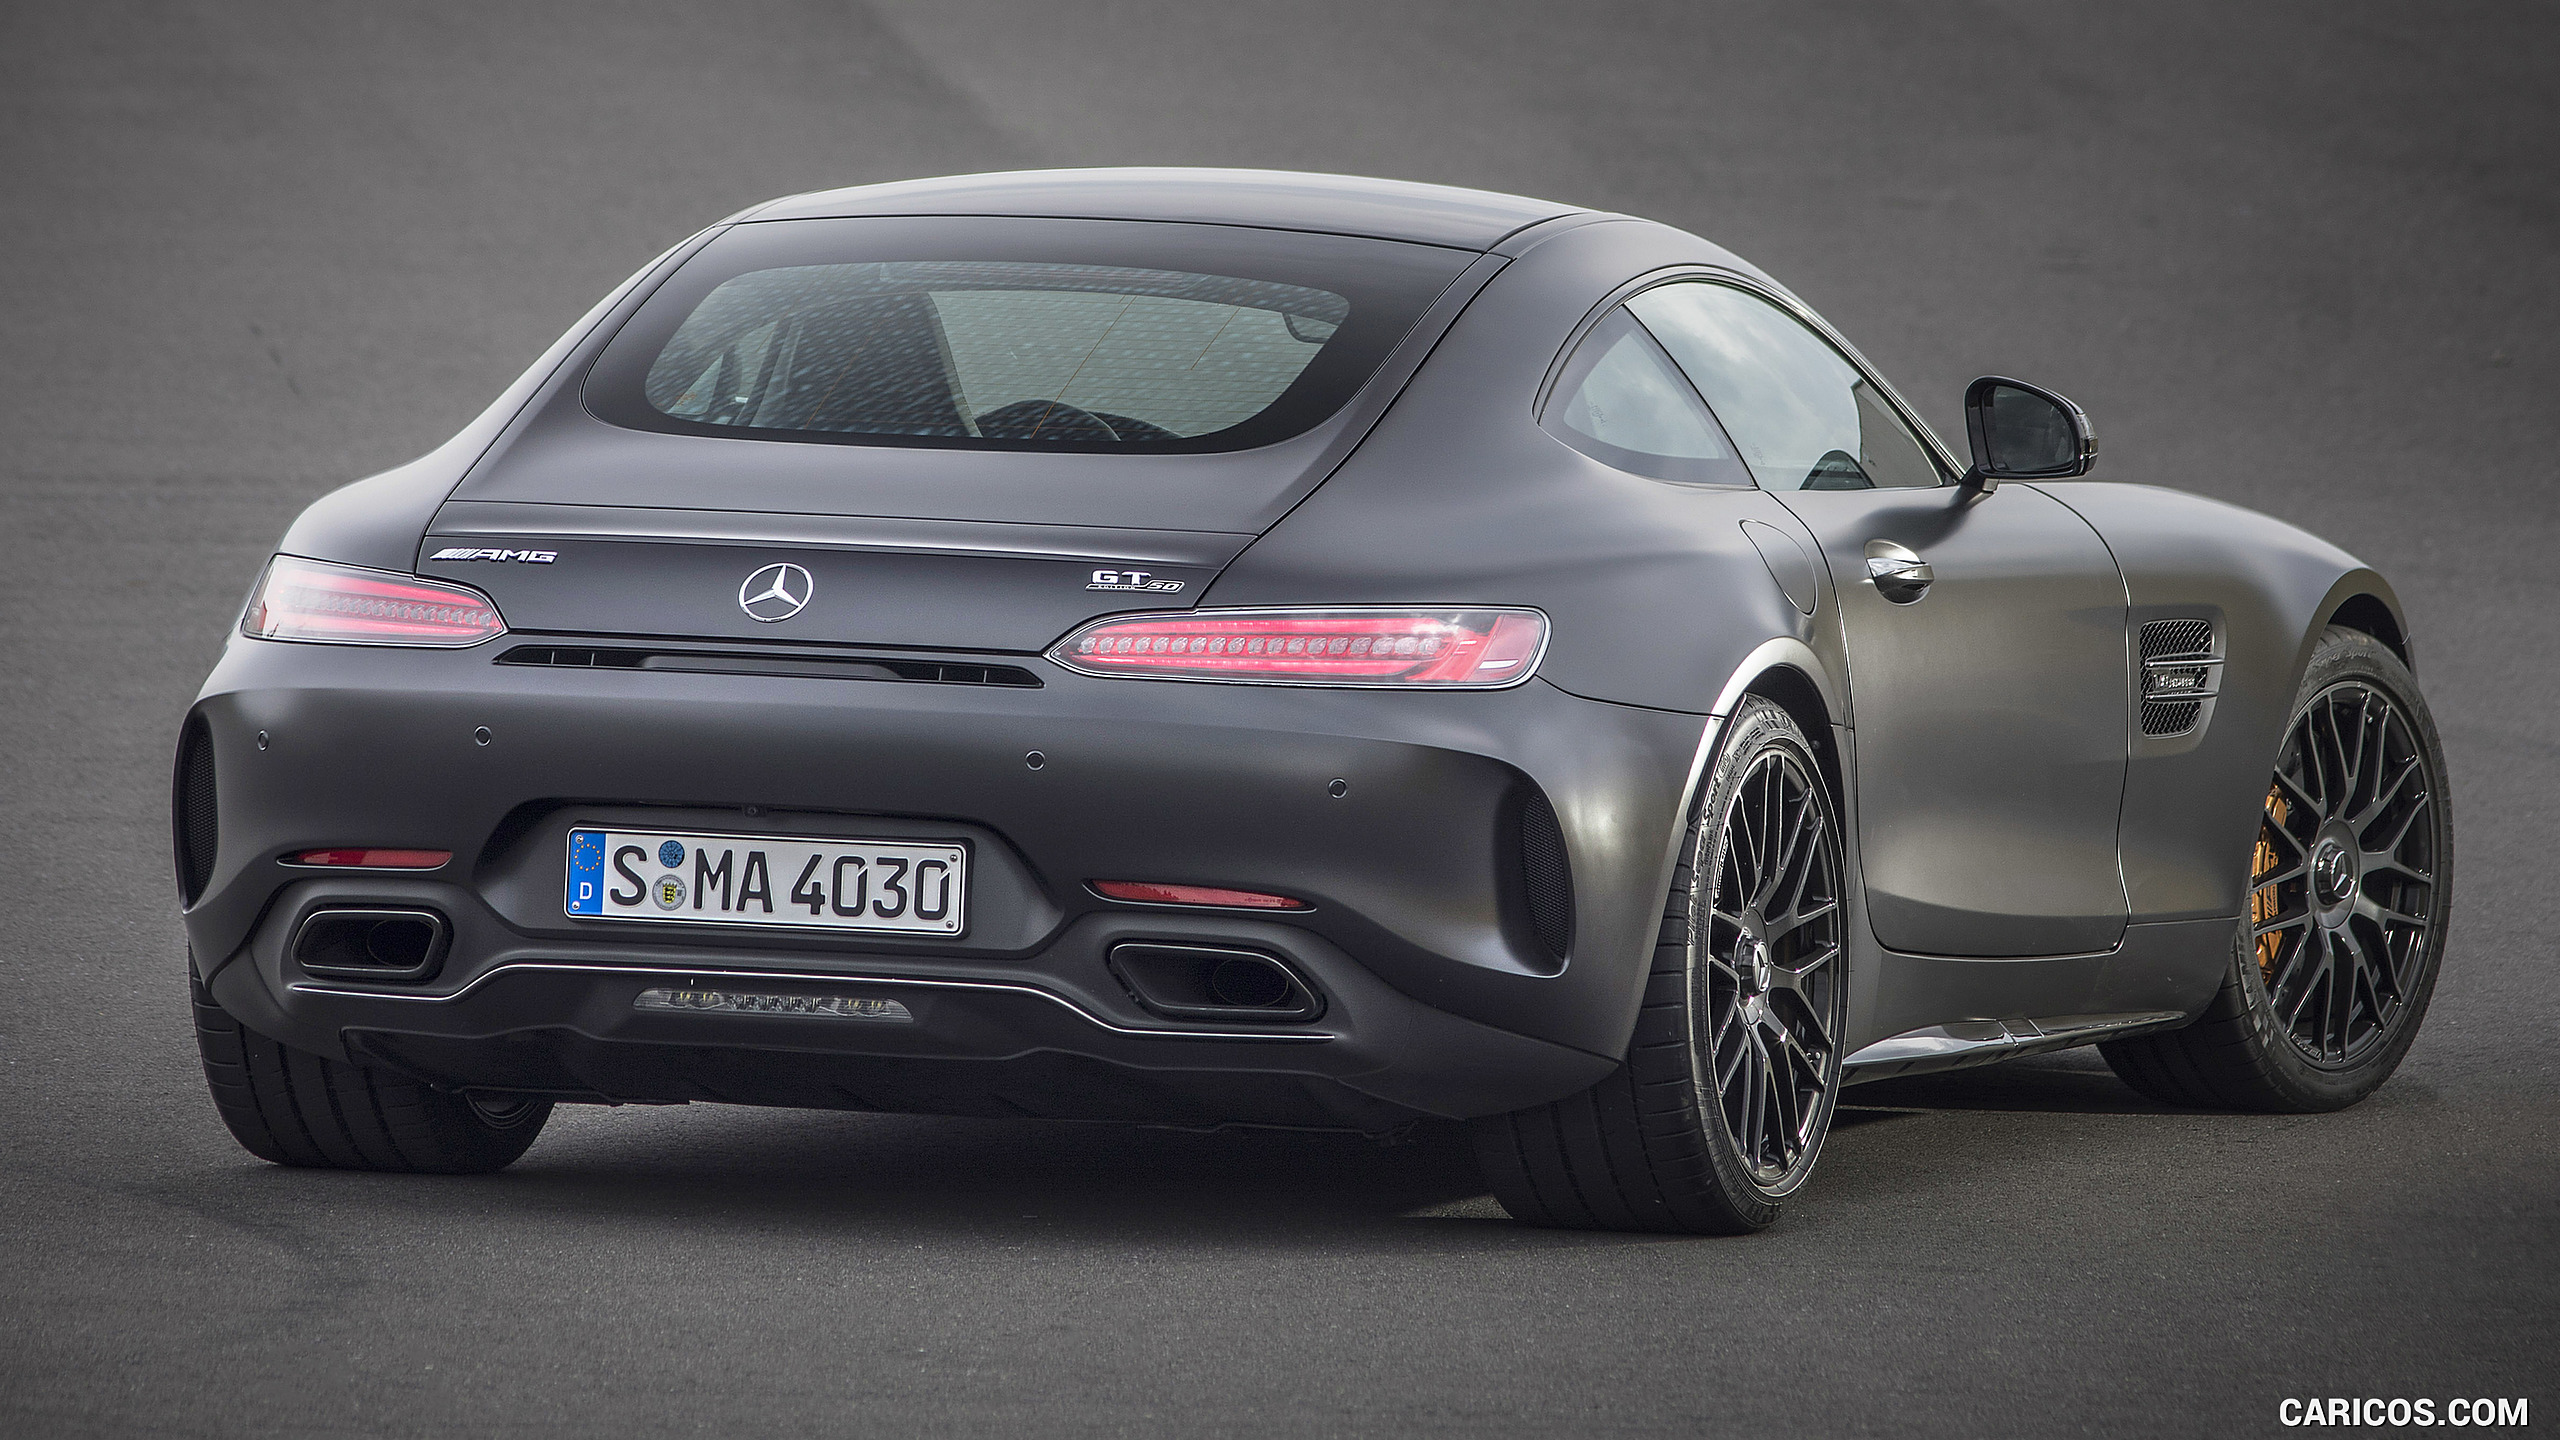 2018 Mercedes-AMG GT C Coupe Edition 50 - Rear, #35 of 70